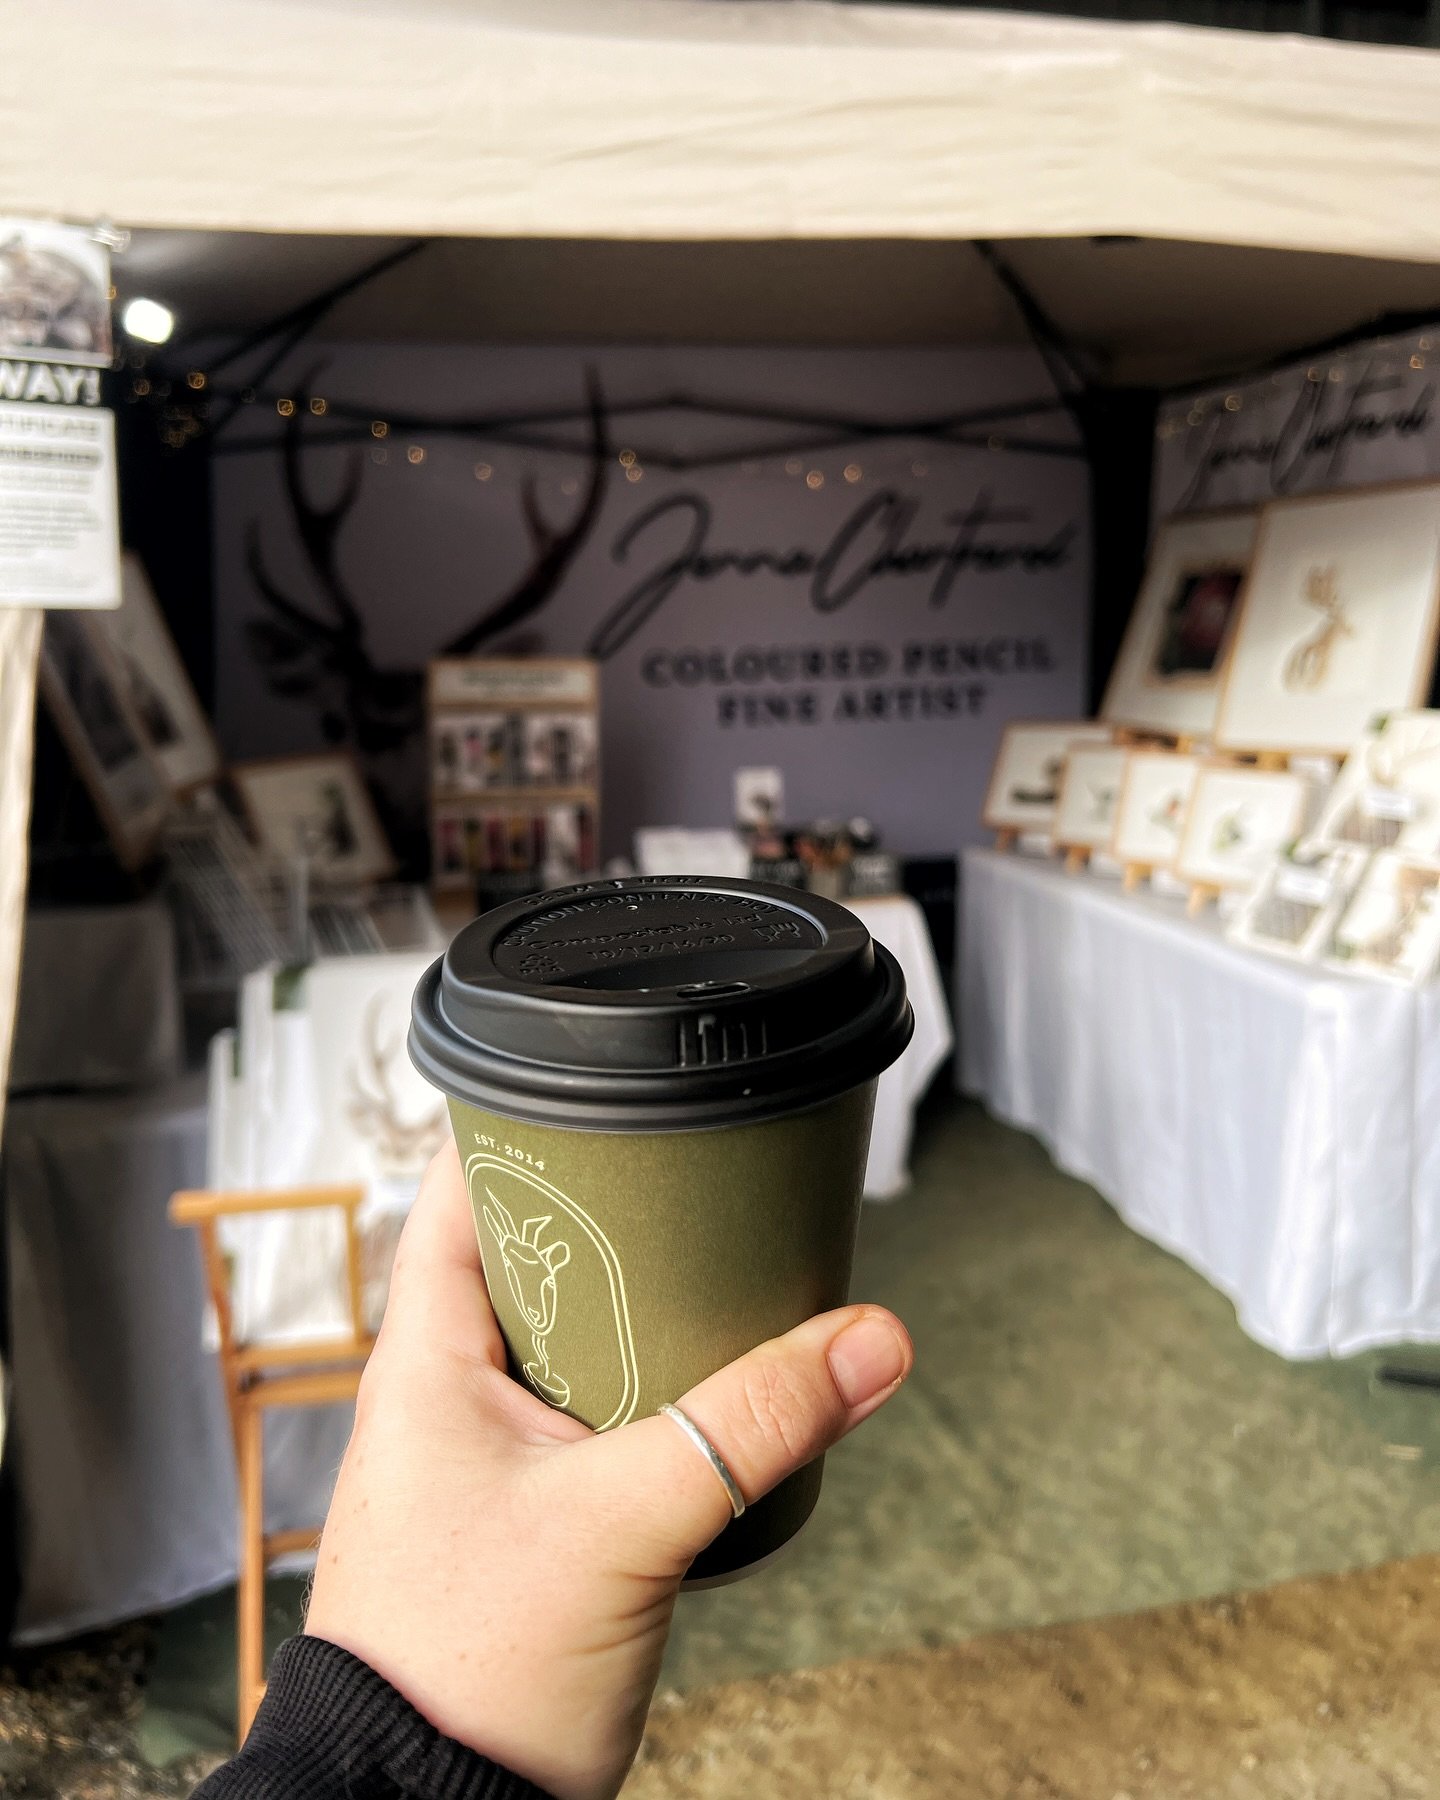 🌿 AgFest Day 3 🌿

We&rsquo;re caffeinated and ready to go this morning! Looking forward to another great day, with rumours of 30,000 ticket sales this morning 😱

So if you&rsquo;re one of them coming through the gates this morning don&rsquo;t forg